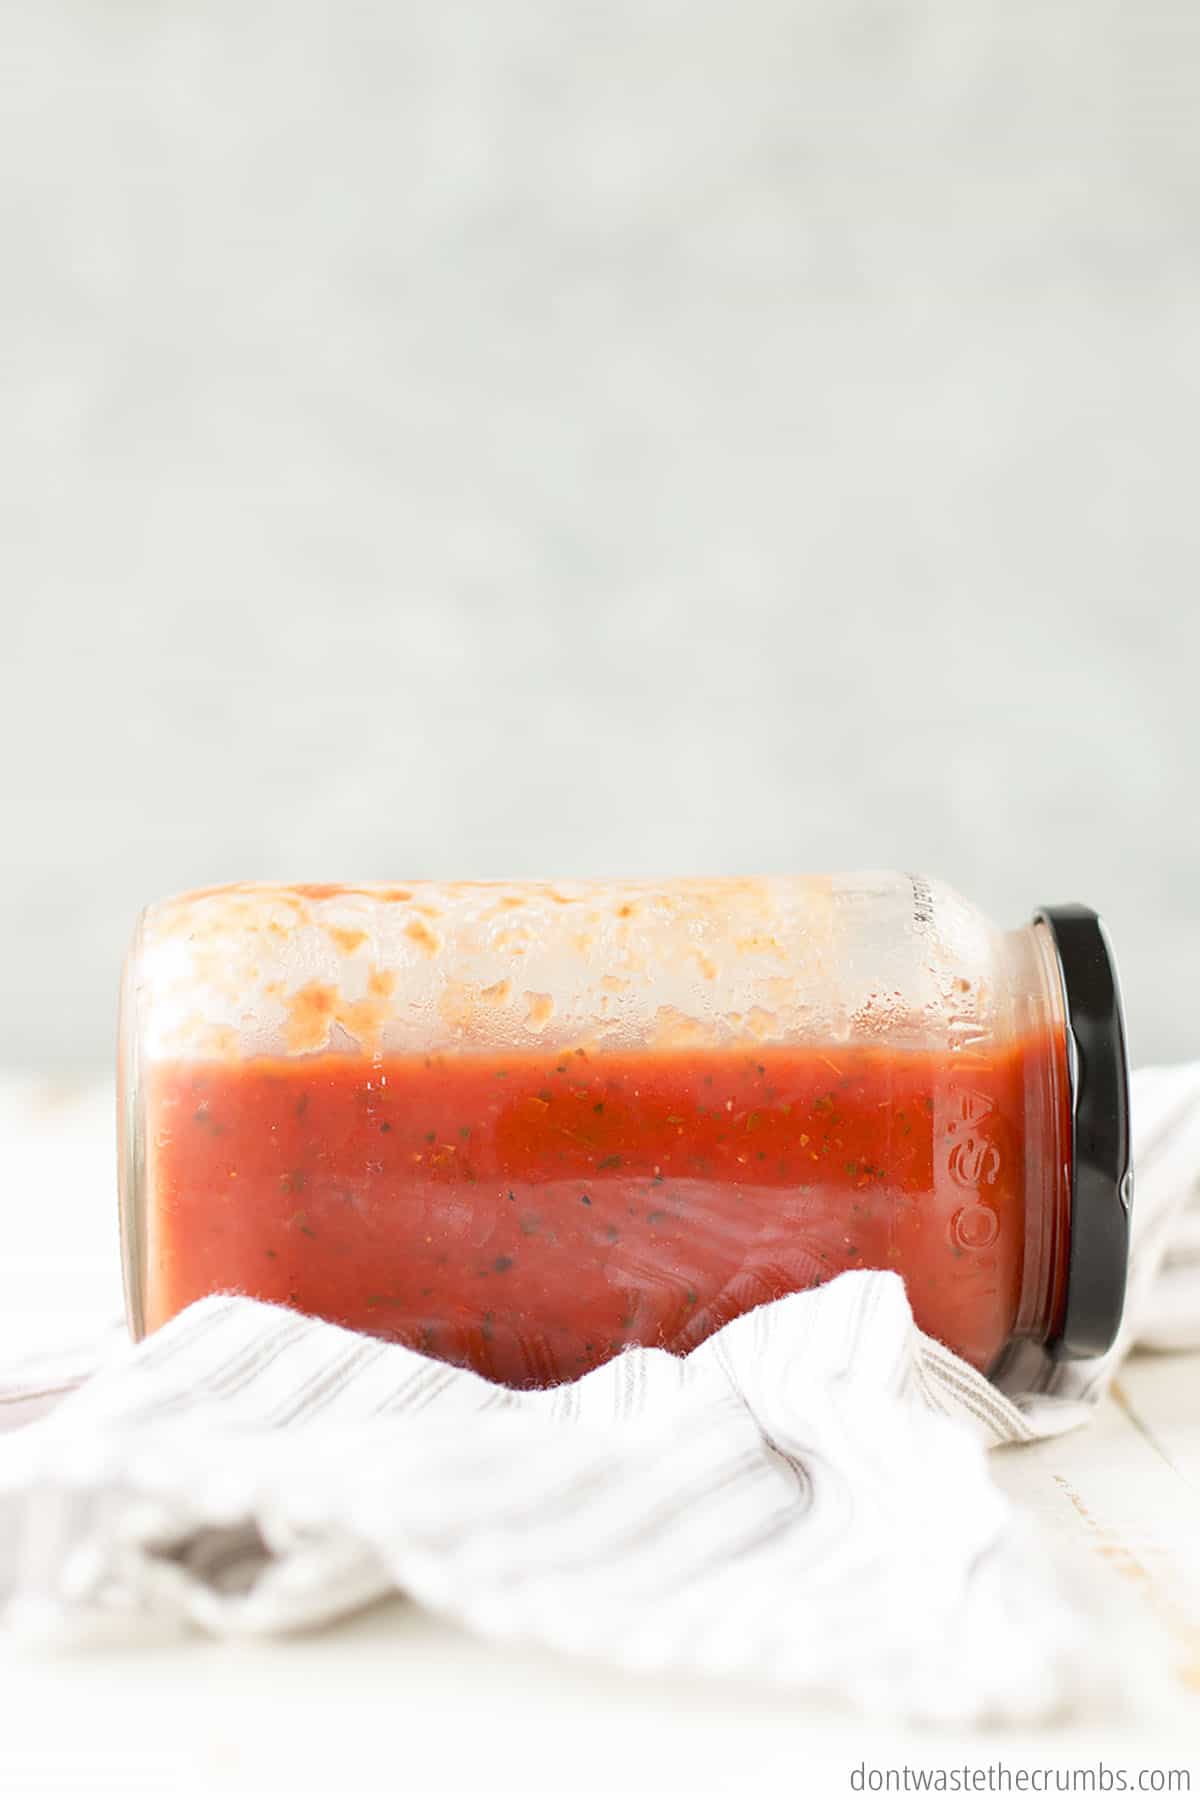 This mason jar filled with hearty spaghetti sauce is stored on its side with plenty of open space along the upper length for expansion.